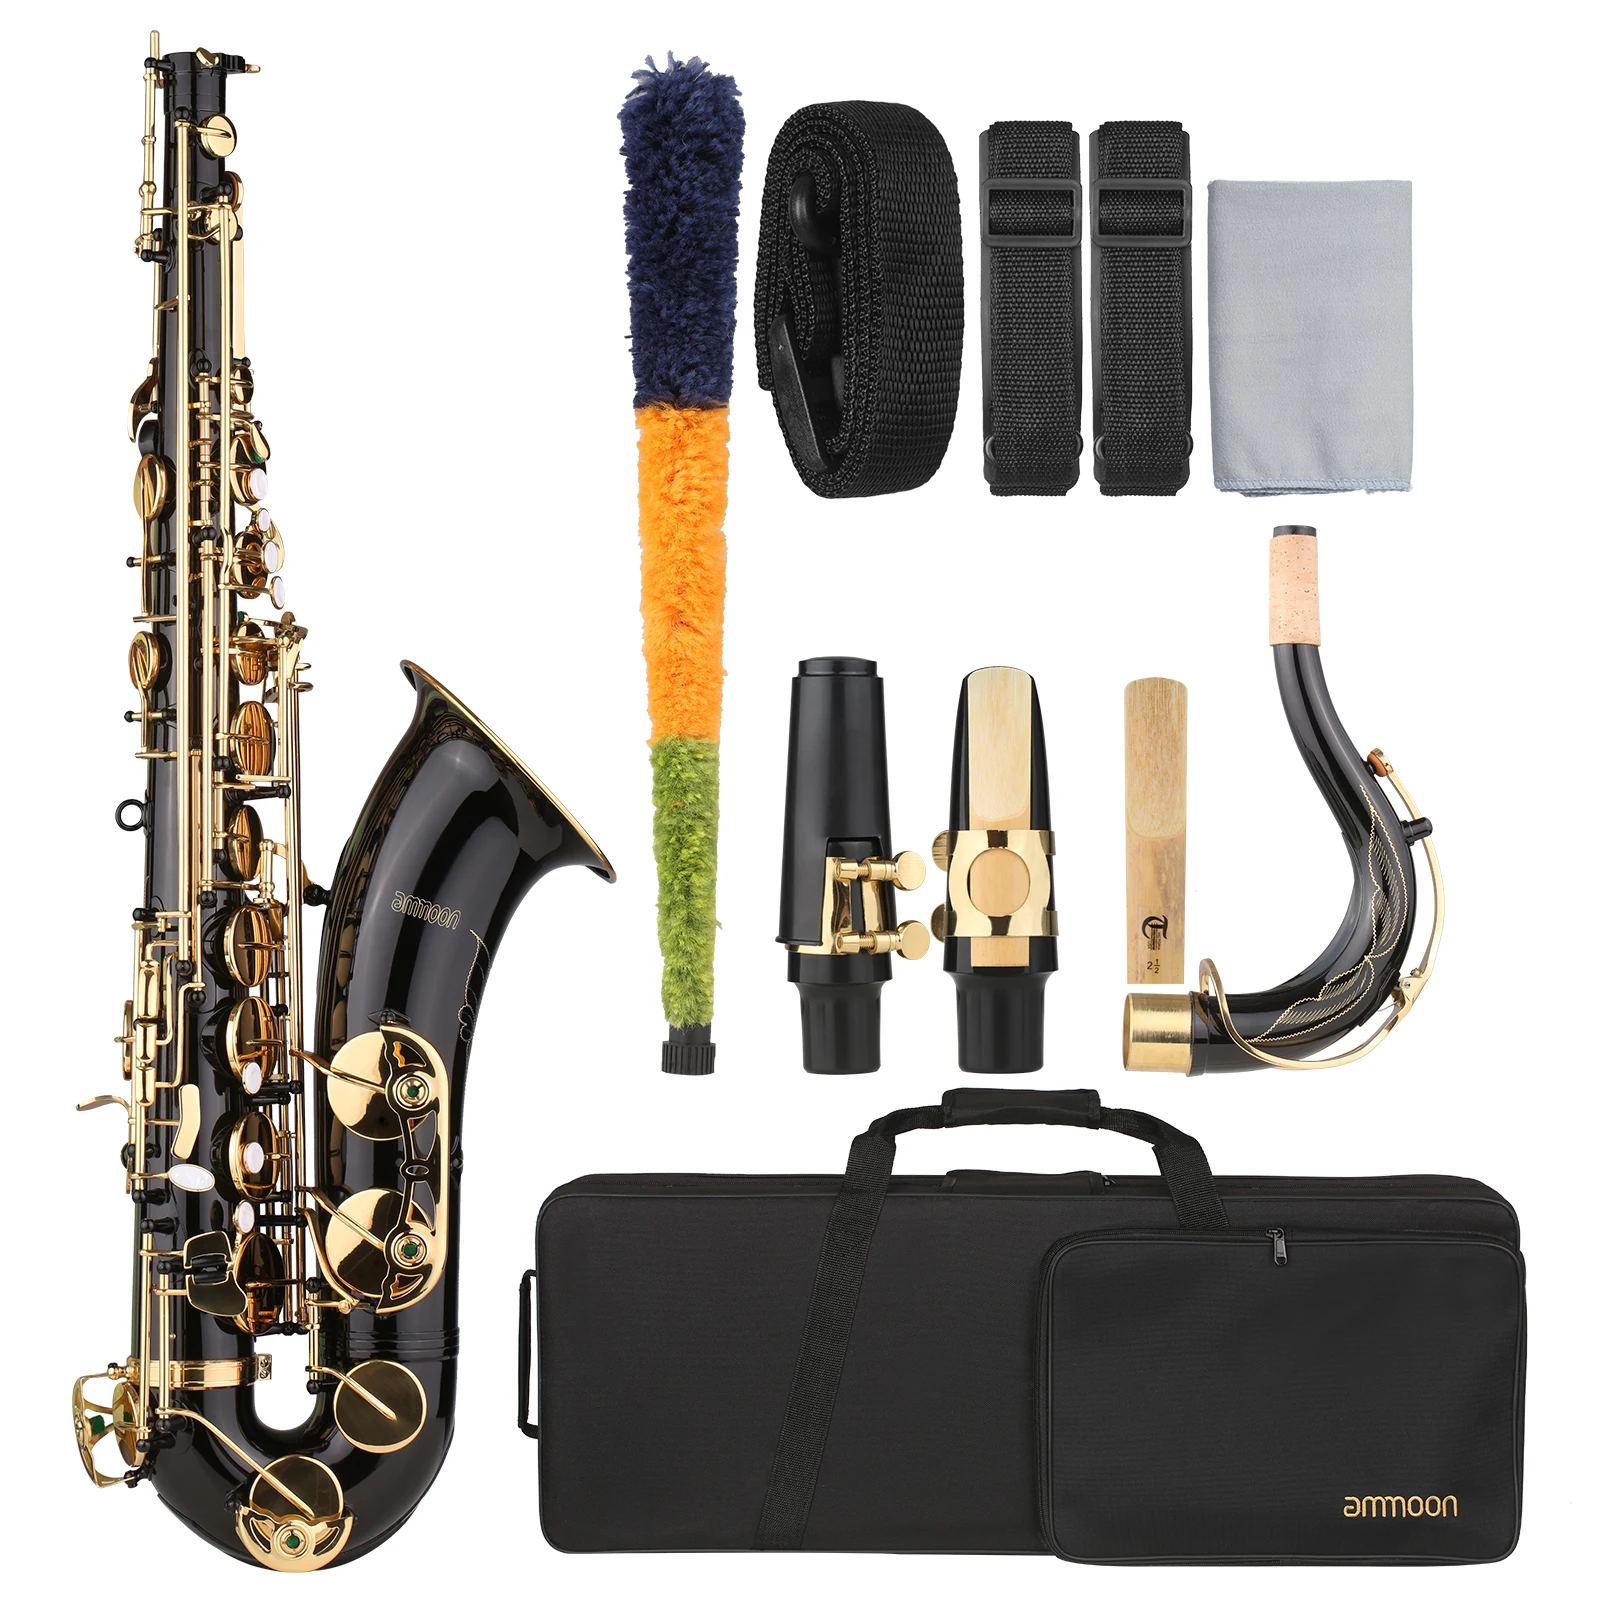 

ammoon B-flat Tenor Saxophone Bb Black Lacquer Sax with Case Mouthpiece Reed Neck Strap Cleaning Cloth Brush for Beginners